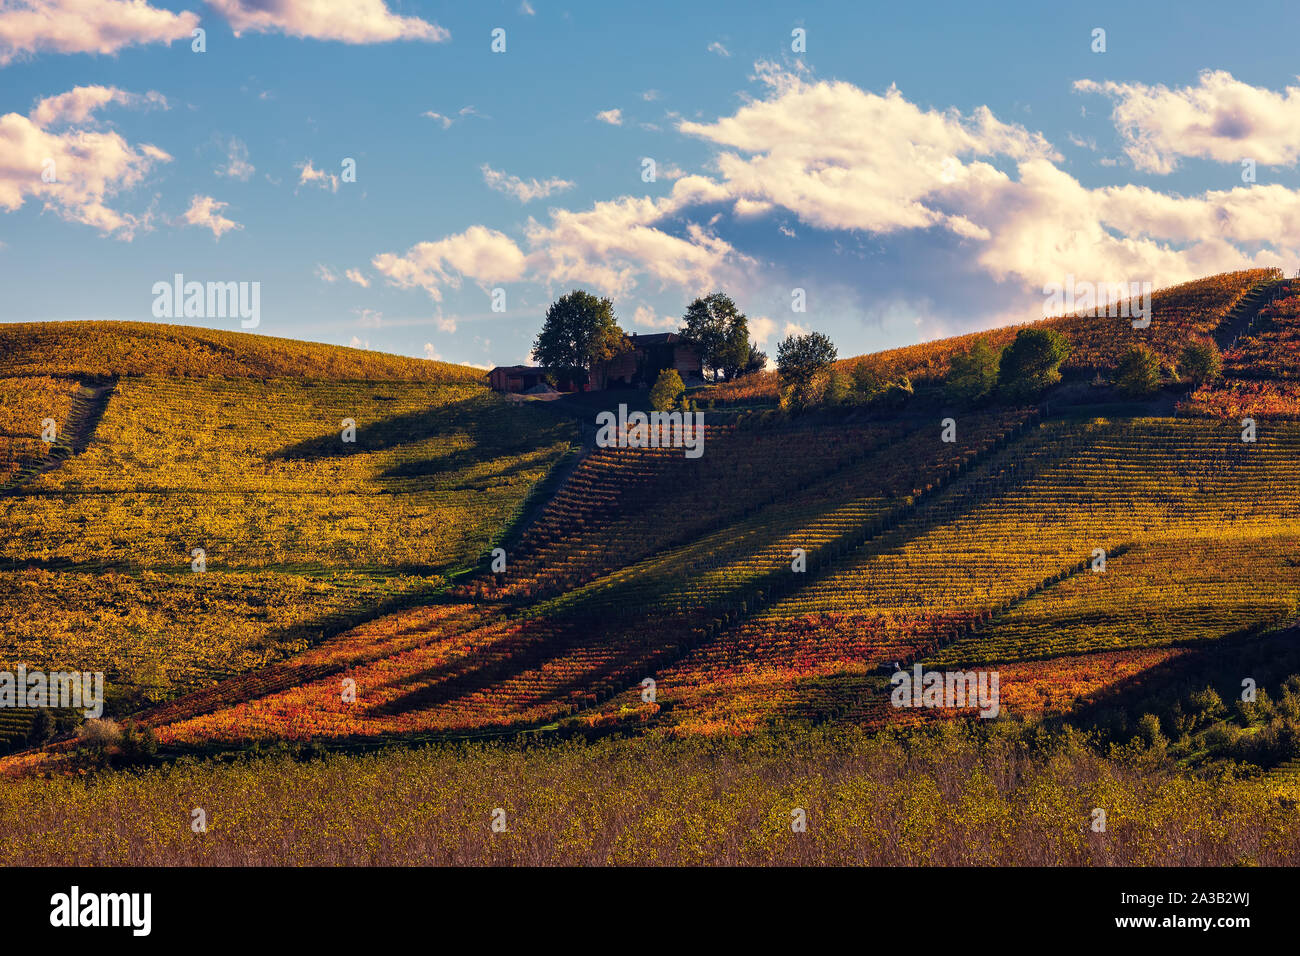 Rural house and colorful autumnal vineyards on the hill in Piedmont, Northern Italy. Stock Photo